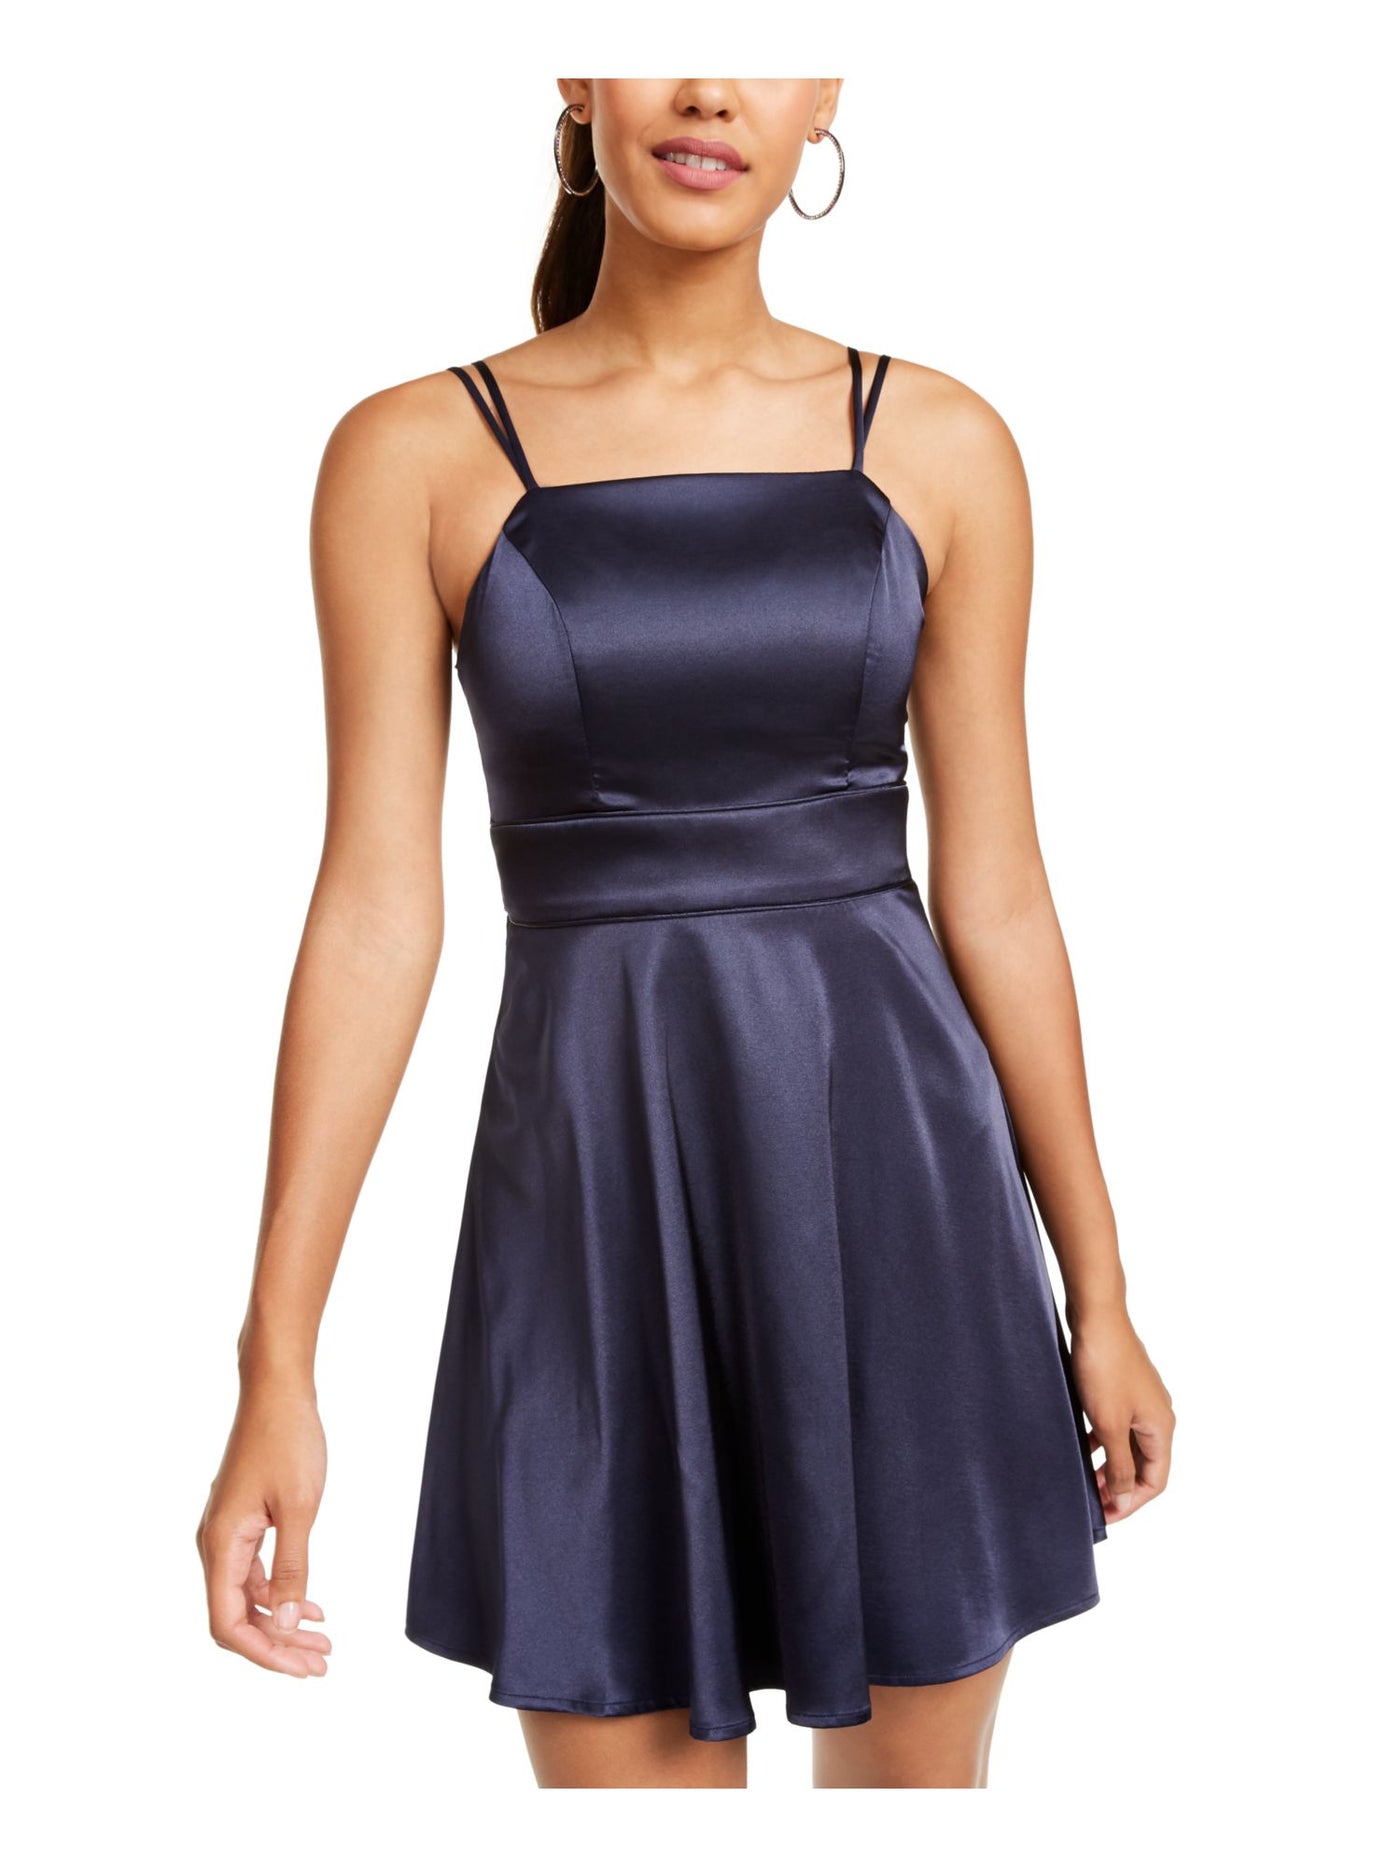 SEQUIN HEARTS Womens Navy Spaghetti Strap Square Neck Short Party Fit + Flare Dress Juniors 9